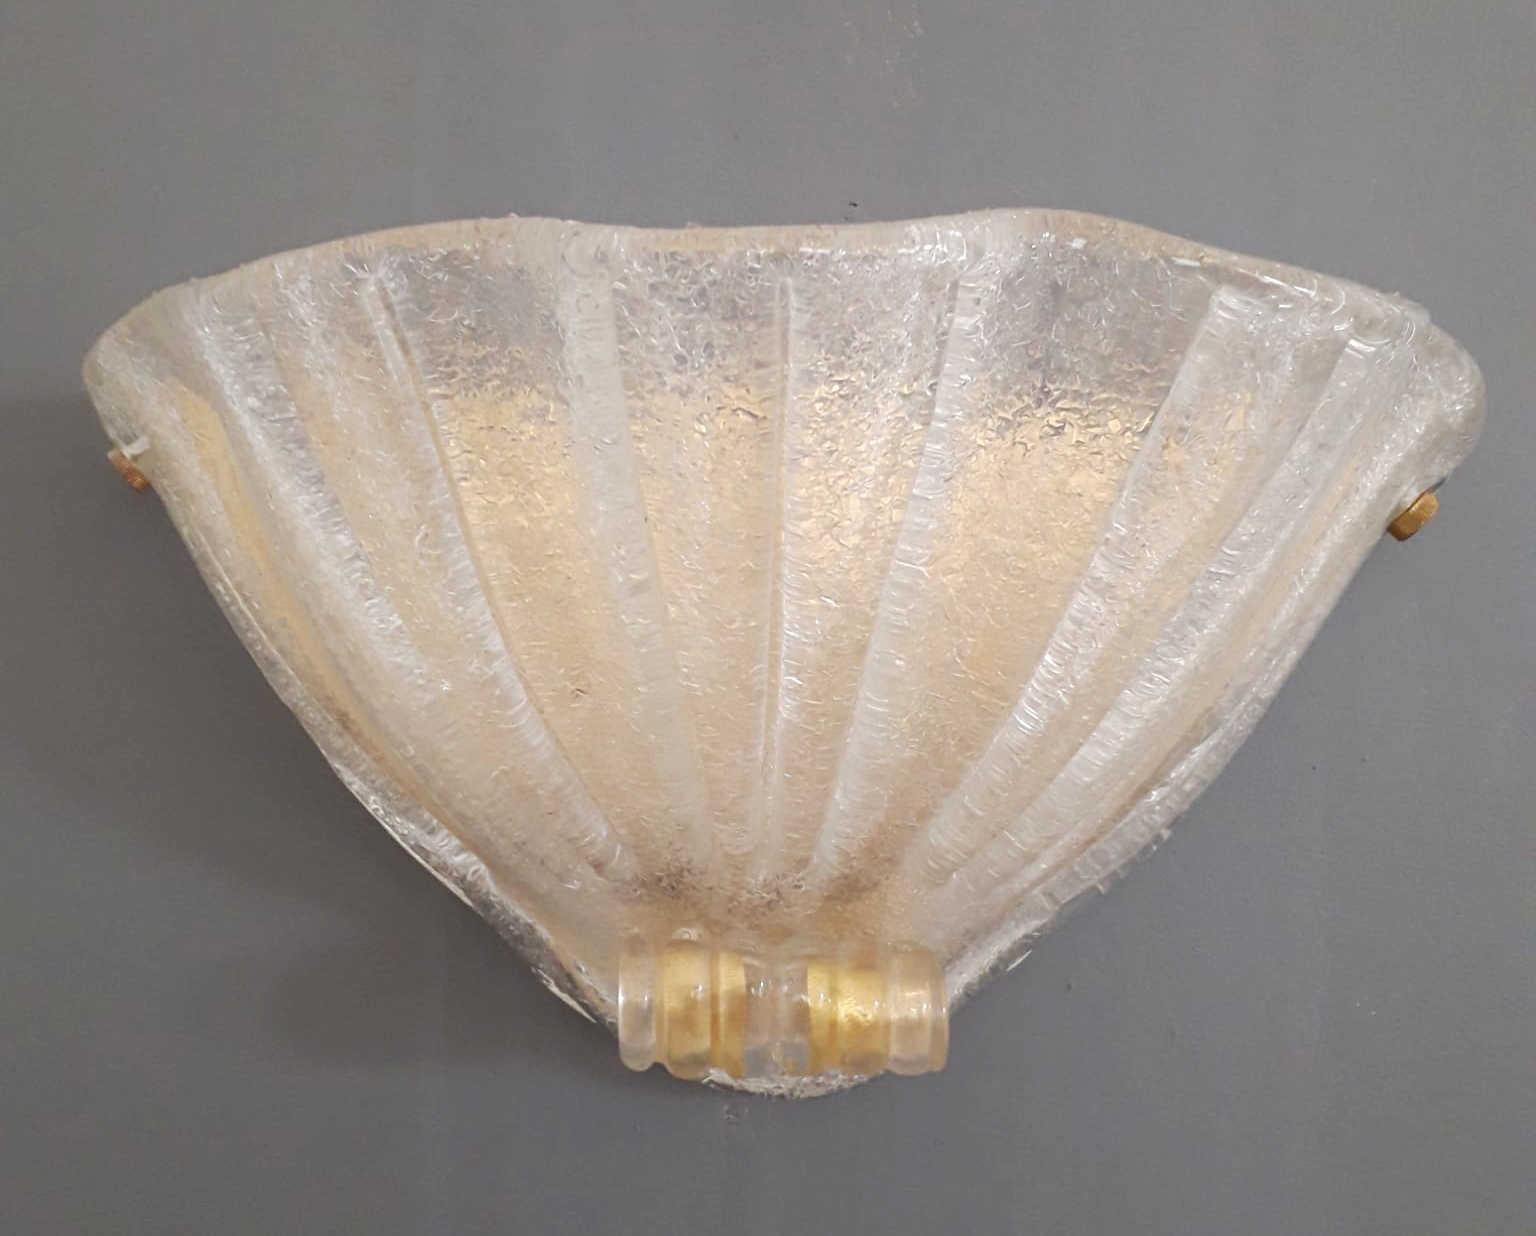 Vintage Italian Murano glass uplight sconces hand blown with graniglia technique to produce granular textured effect and infused with gold flecks, mounted on brass frames / Made in Italy, circa 1960s.
Measures: width 15.5 inches / Height 10 inches